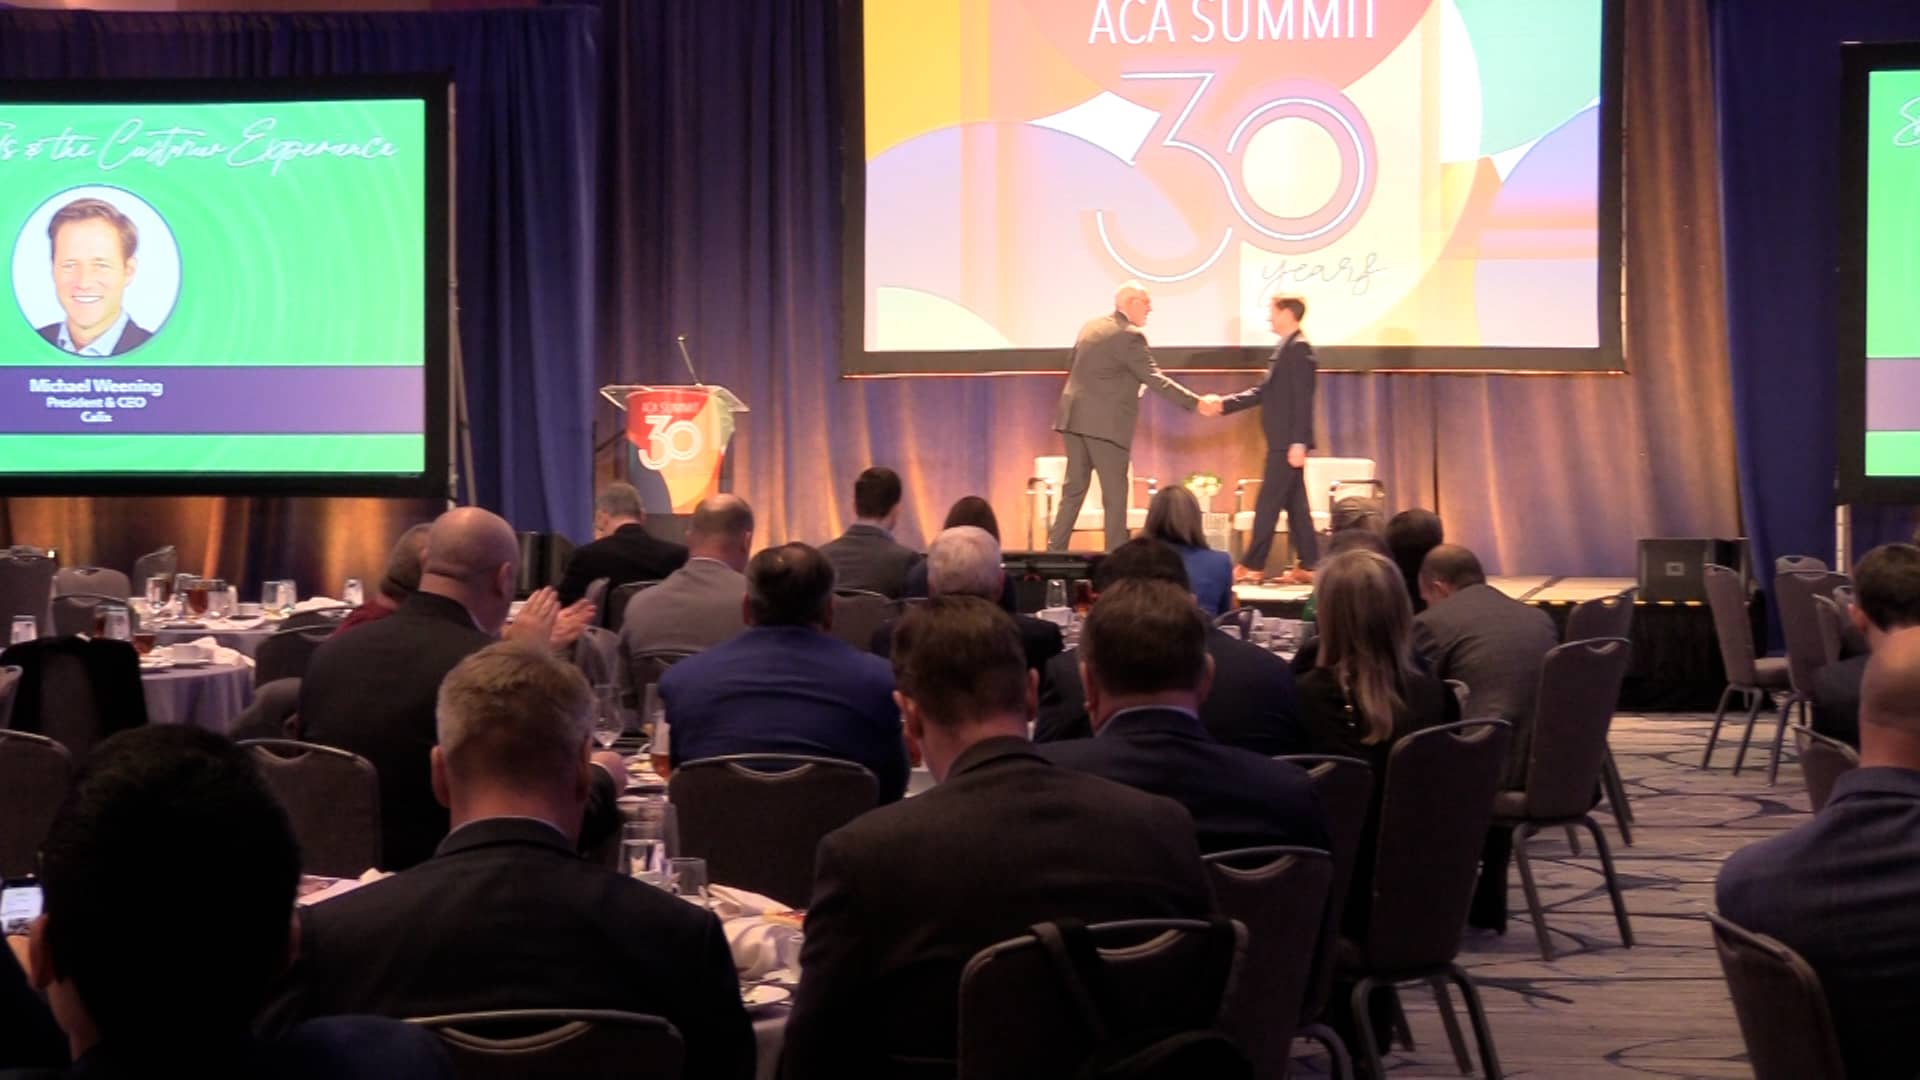 Michael Weening of Calix on stage with John Higginbotham of ACA Connects at the ACA Summit.